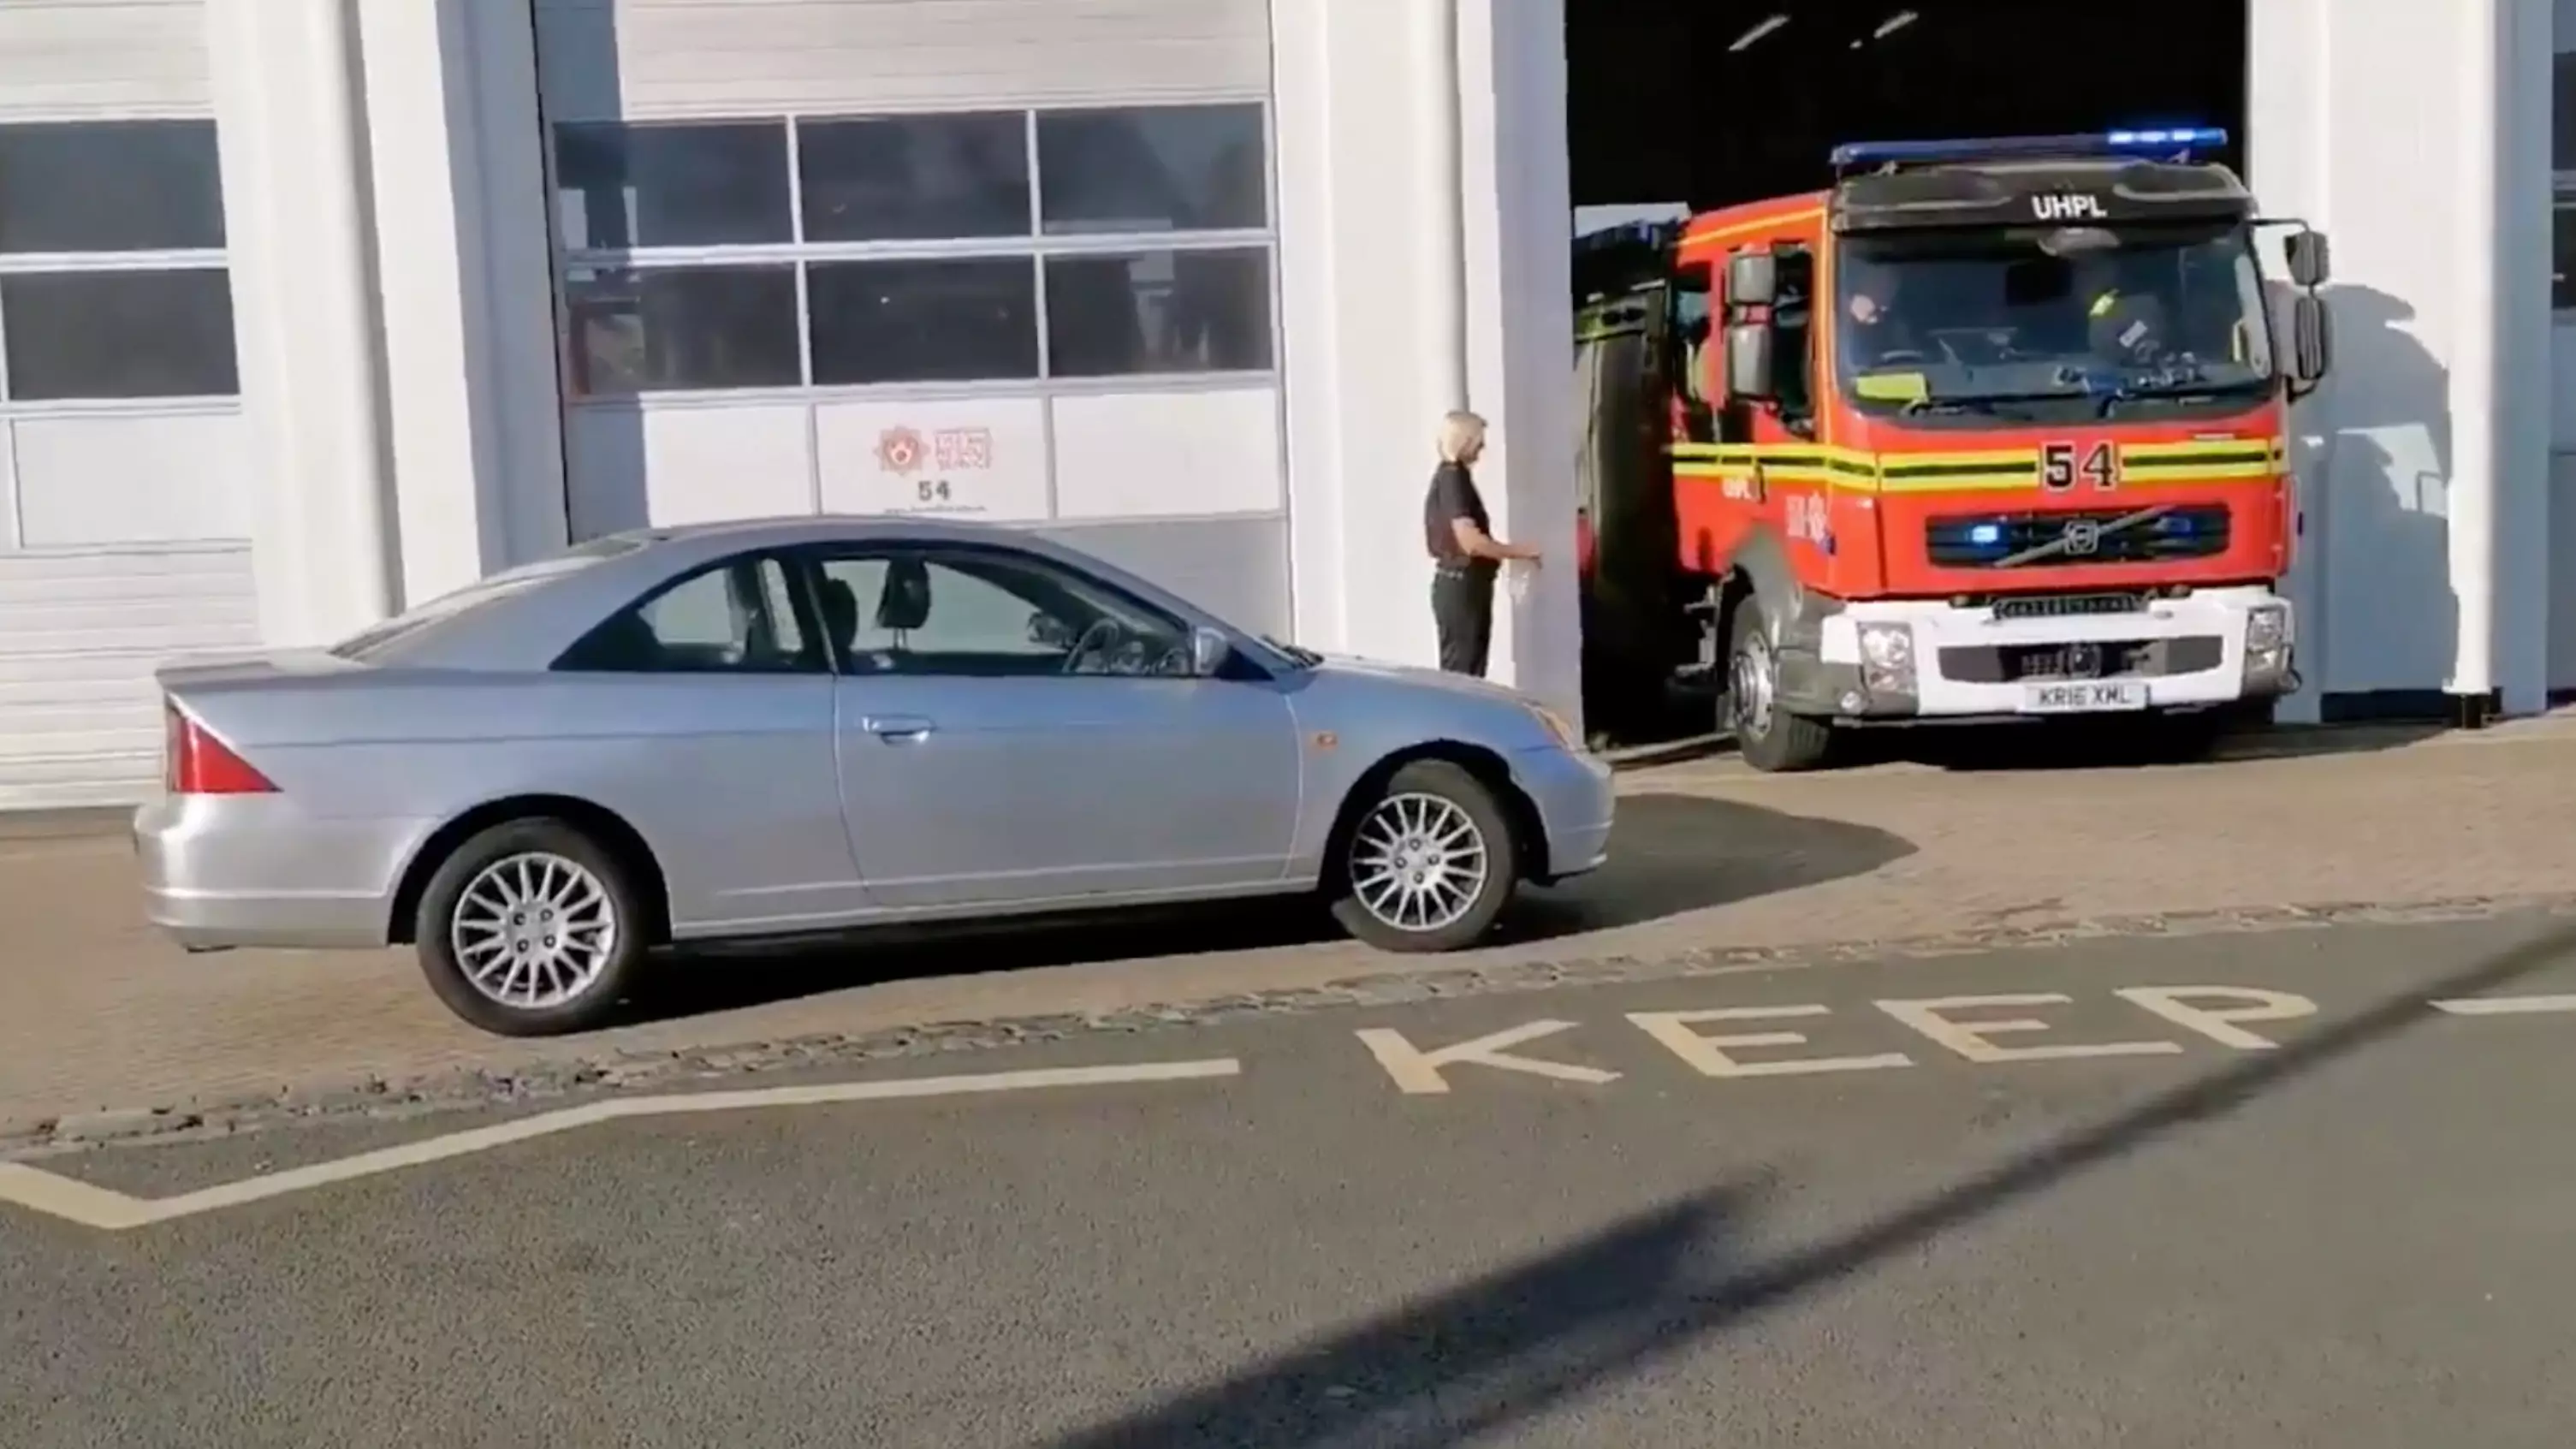 Woman Parks Blocking Fire Station Exit Then Stalls When She Returns